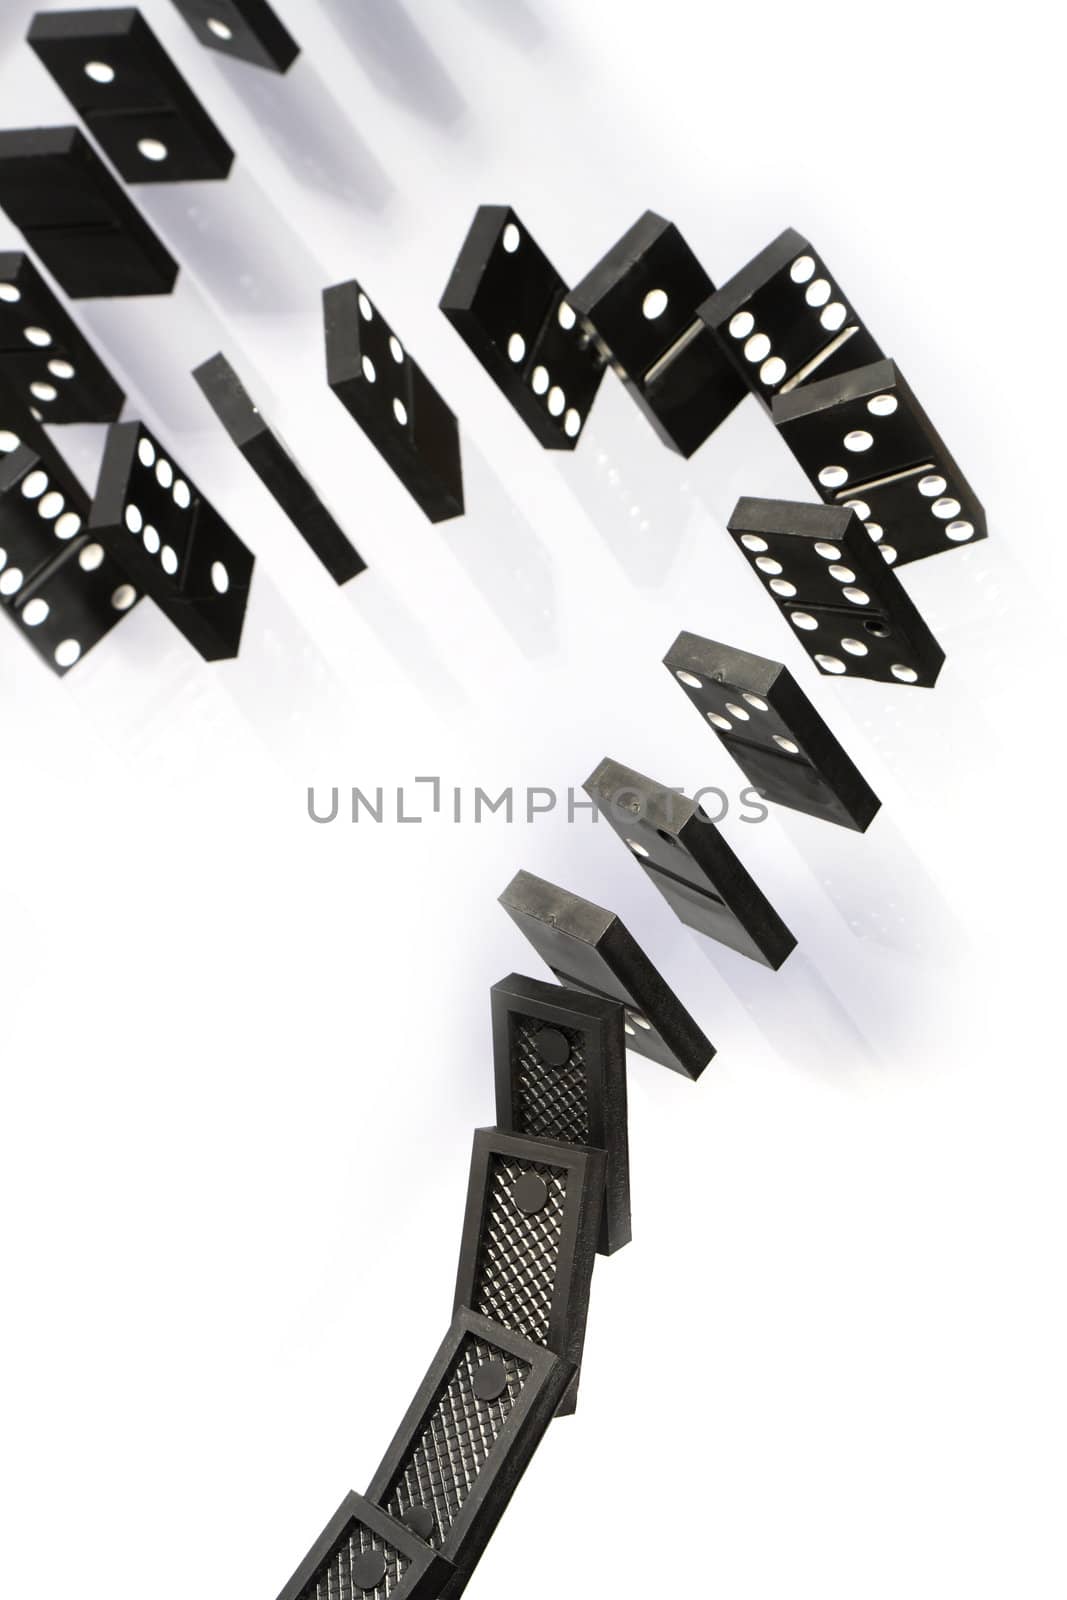 A stack of black dominoes falling on white background